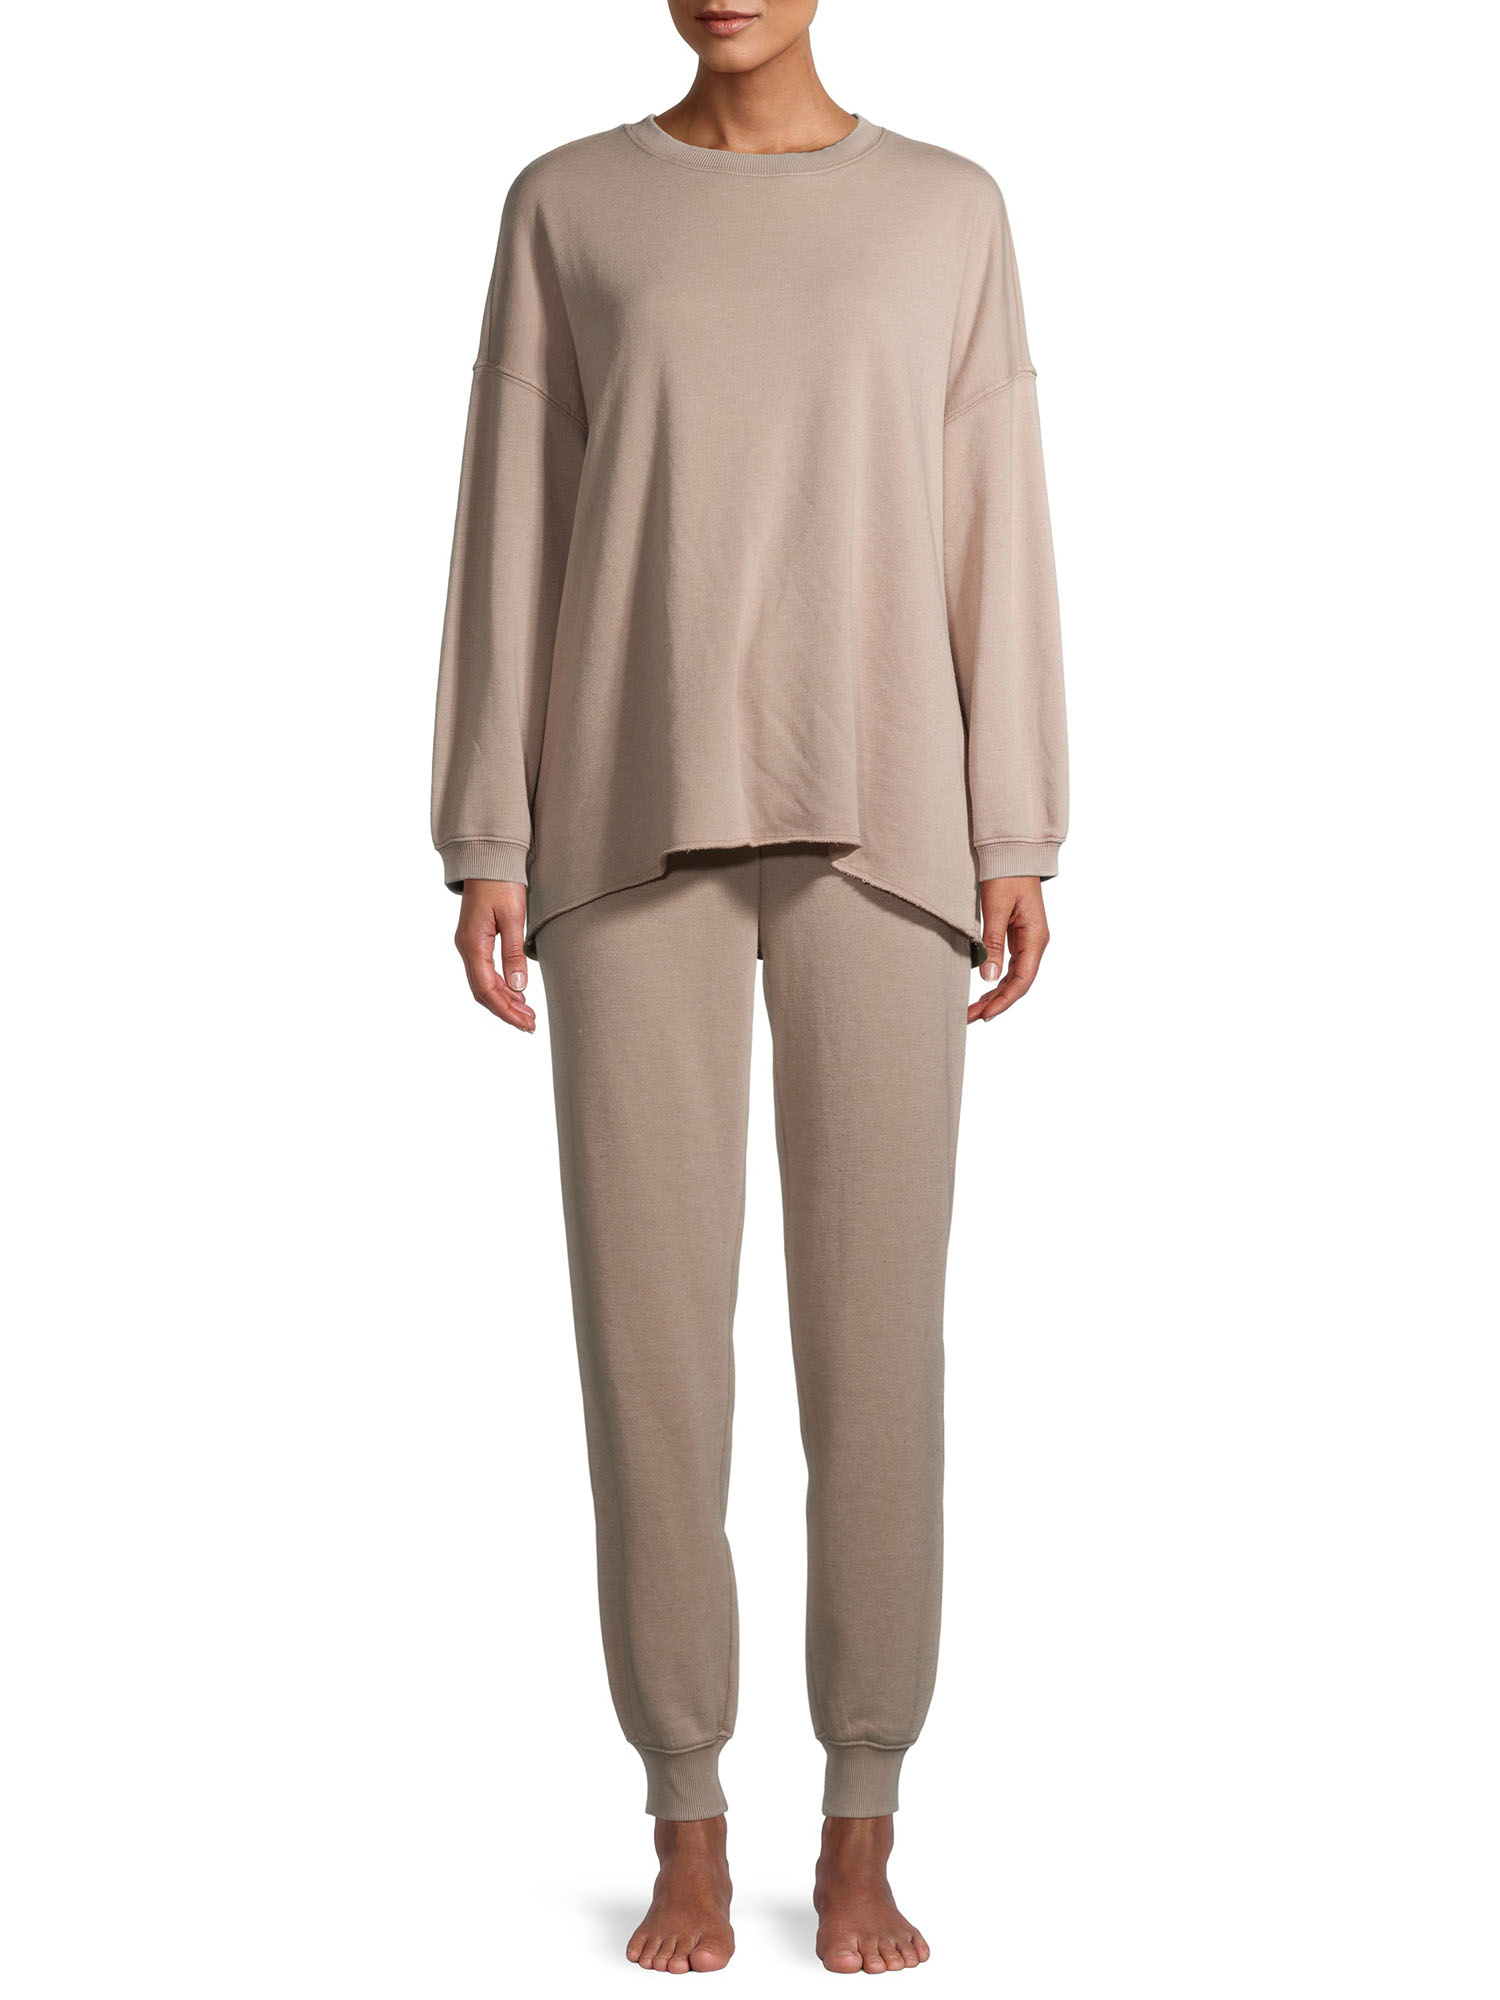 Secret Treasures Women's and Women's Plus Oversized Long Sleeve Top and Jogger Lounge Set - image 3 of 6